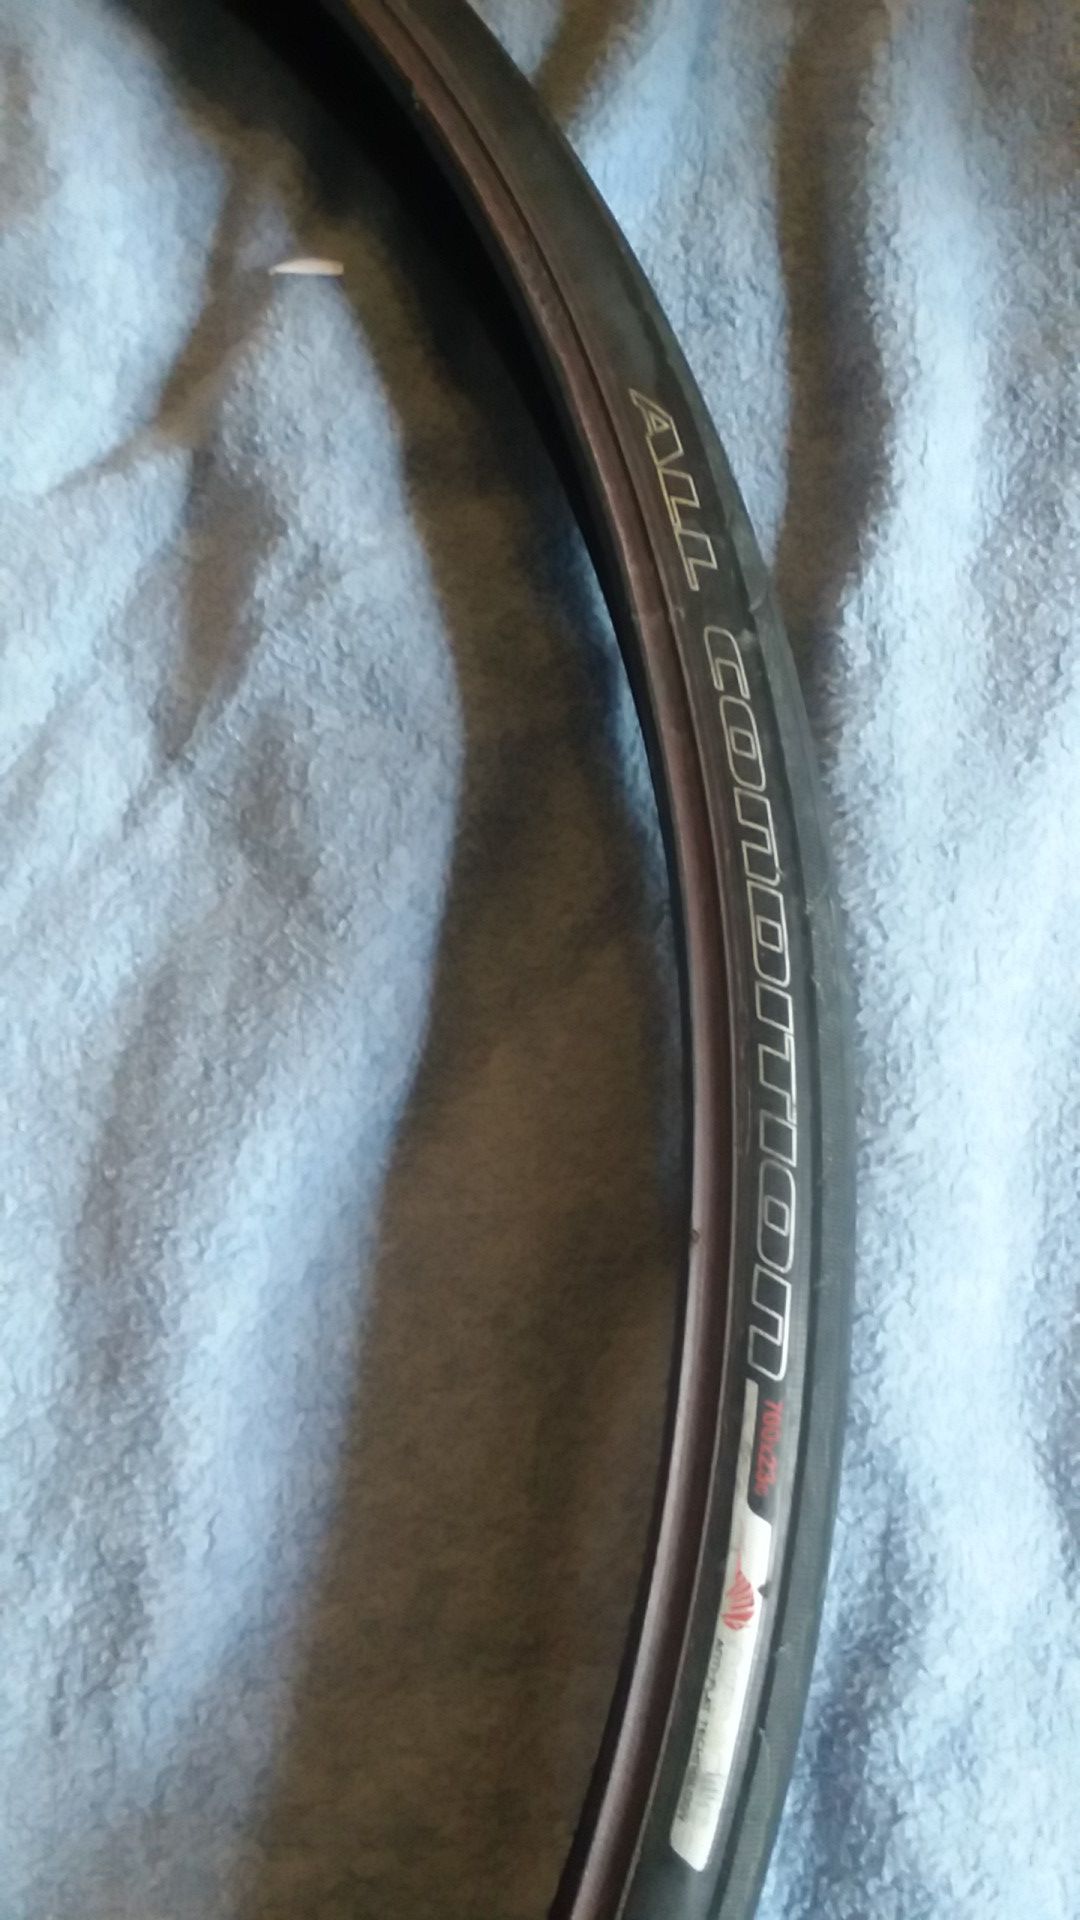 Specialized All Condition bike tire, barely used